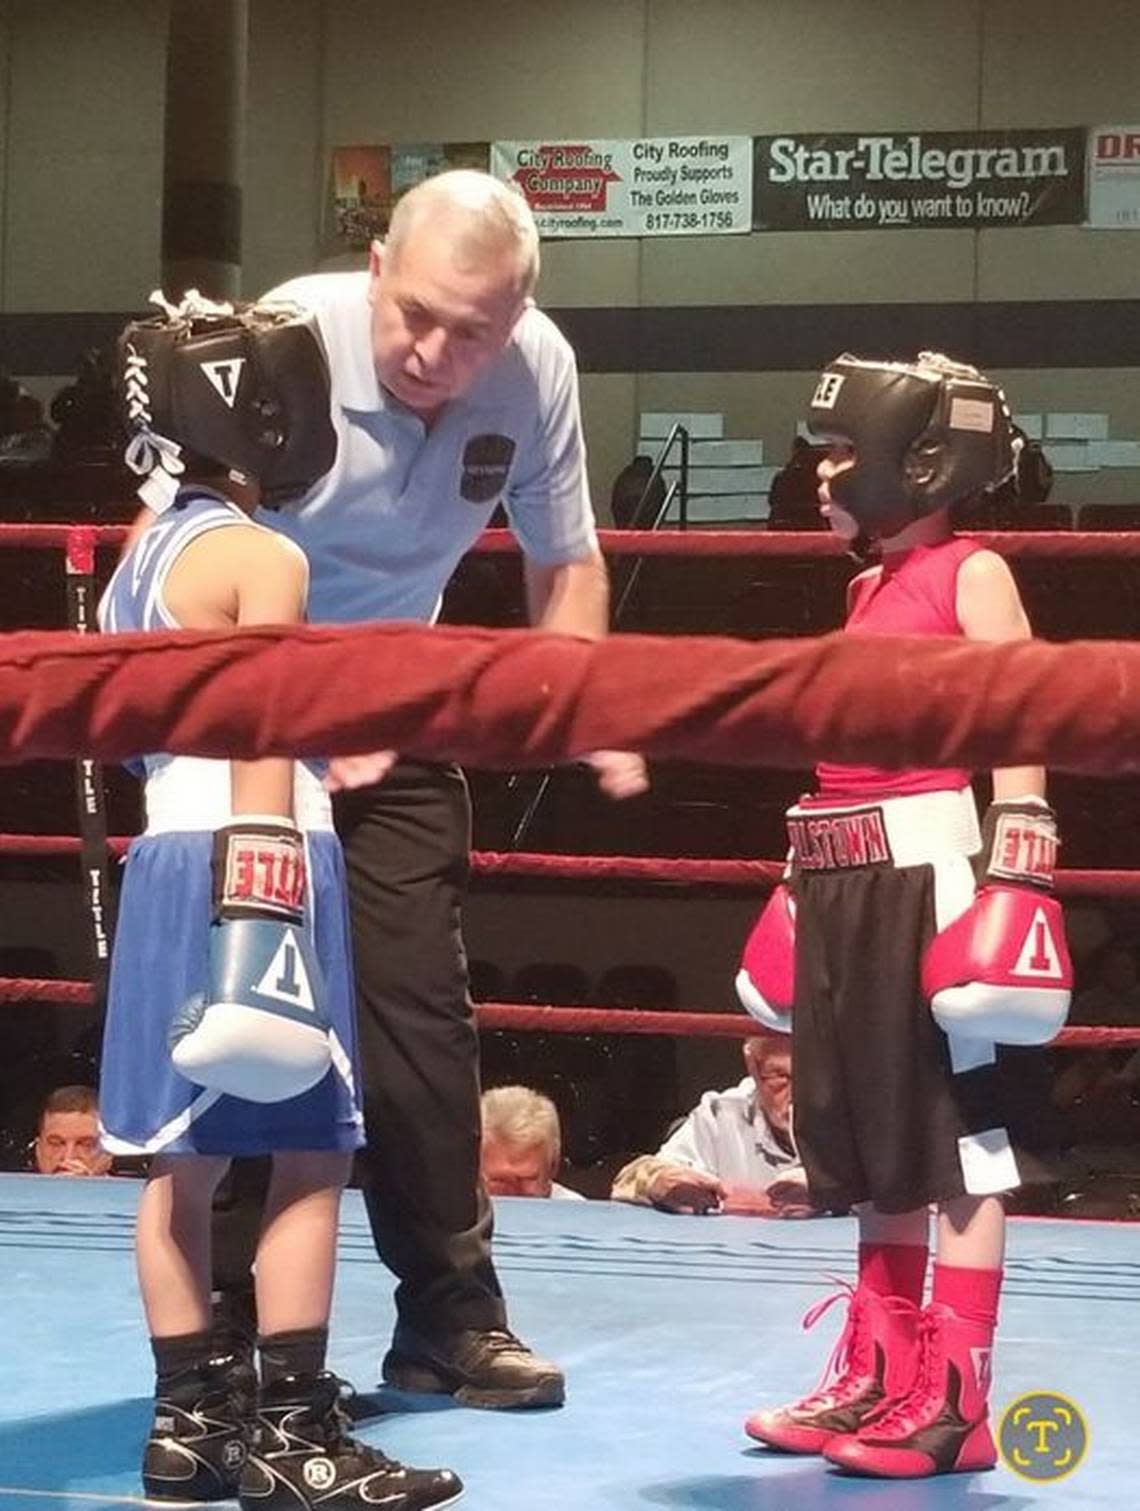 Joe Ponce referees a match between two young fighters at a the Regional Golden Gloves in Fort Worth.